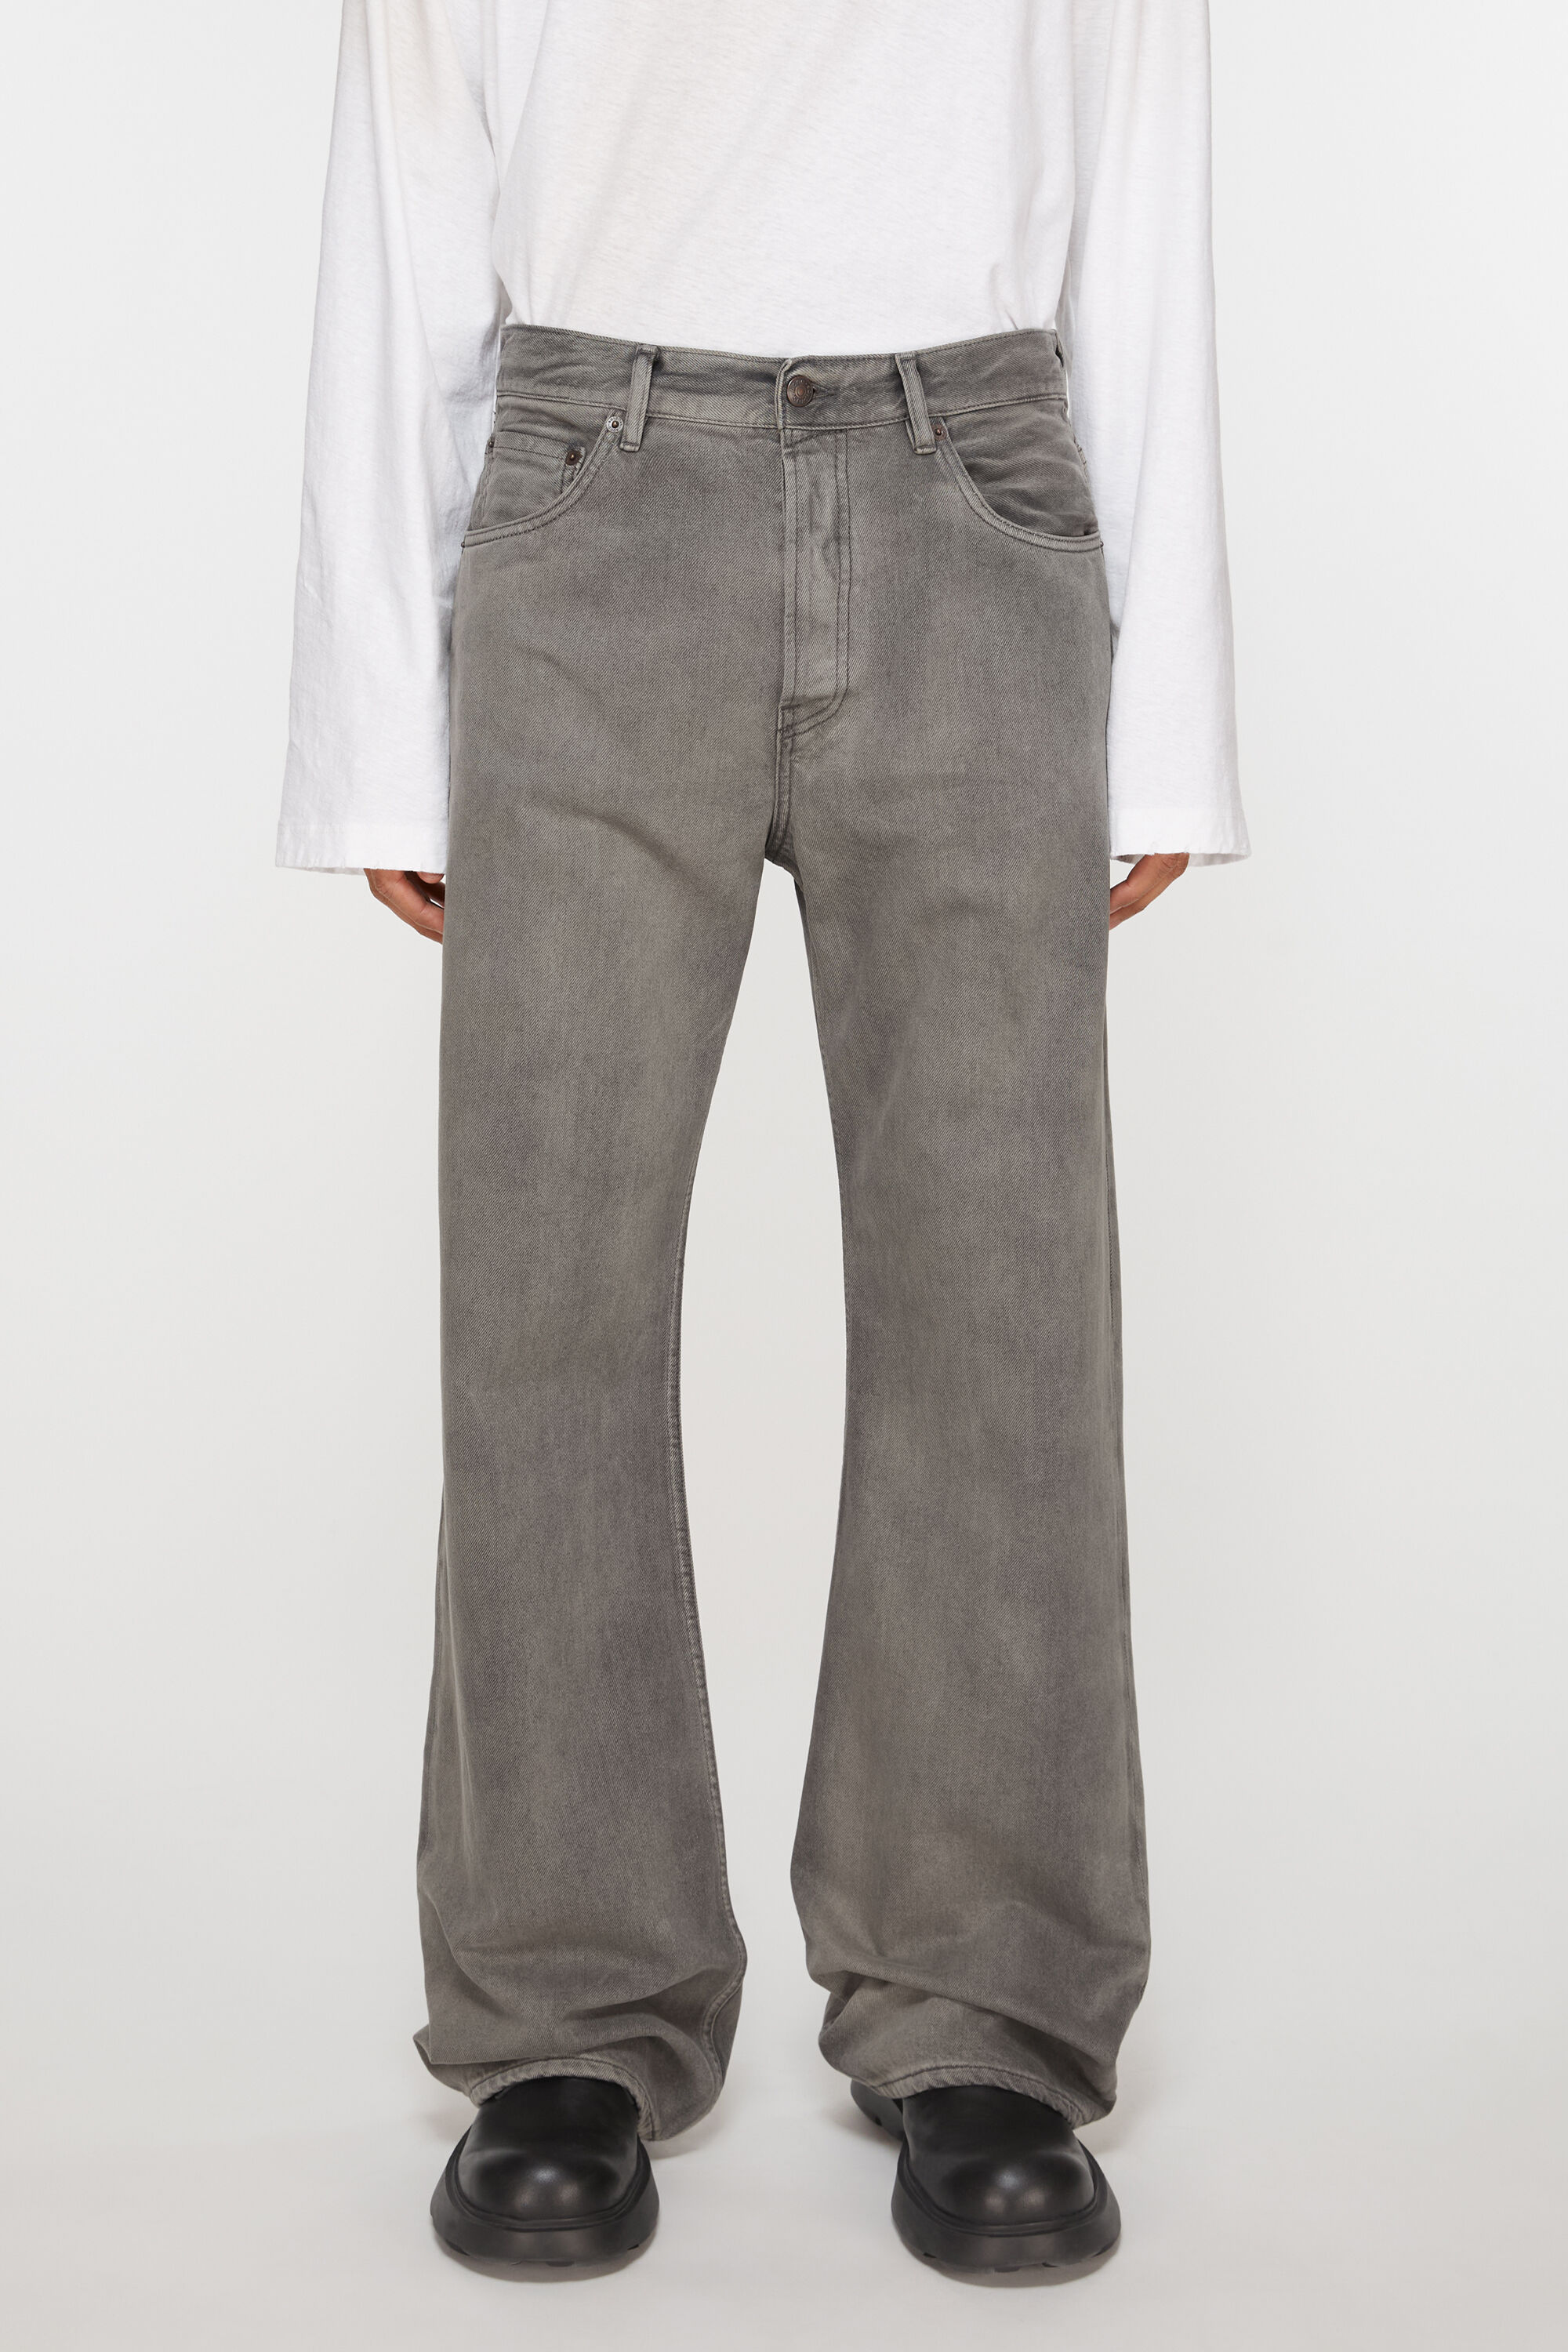 Acne Studios - Loose fit jeans - 2021M - Anthracite grey